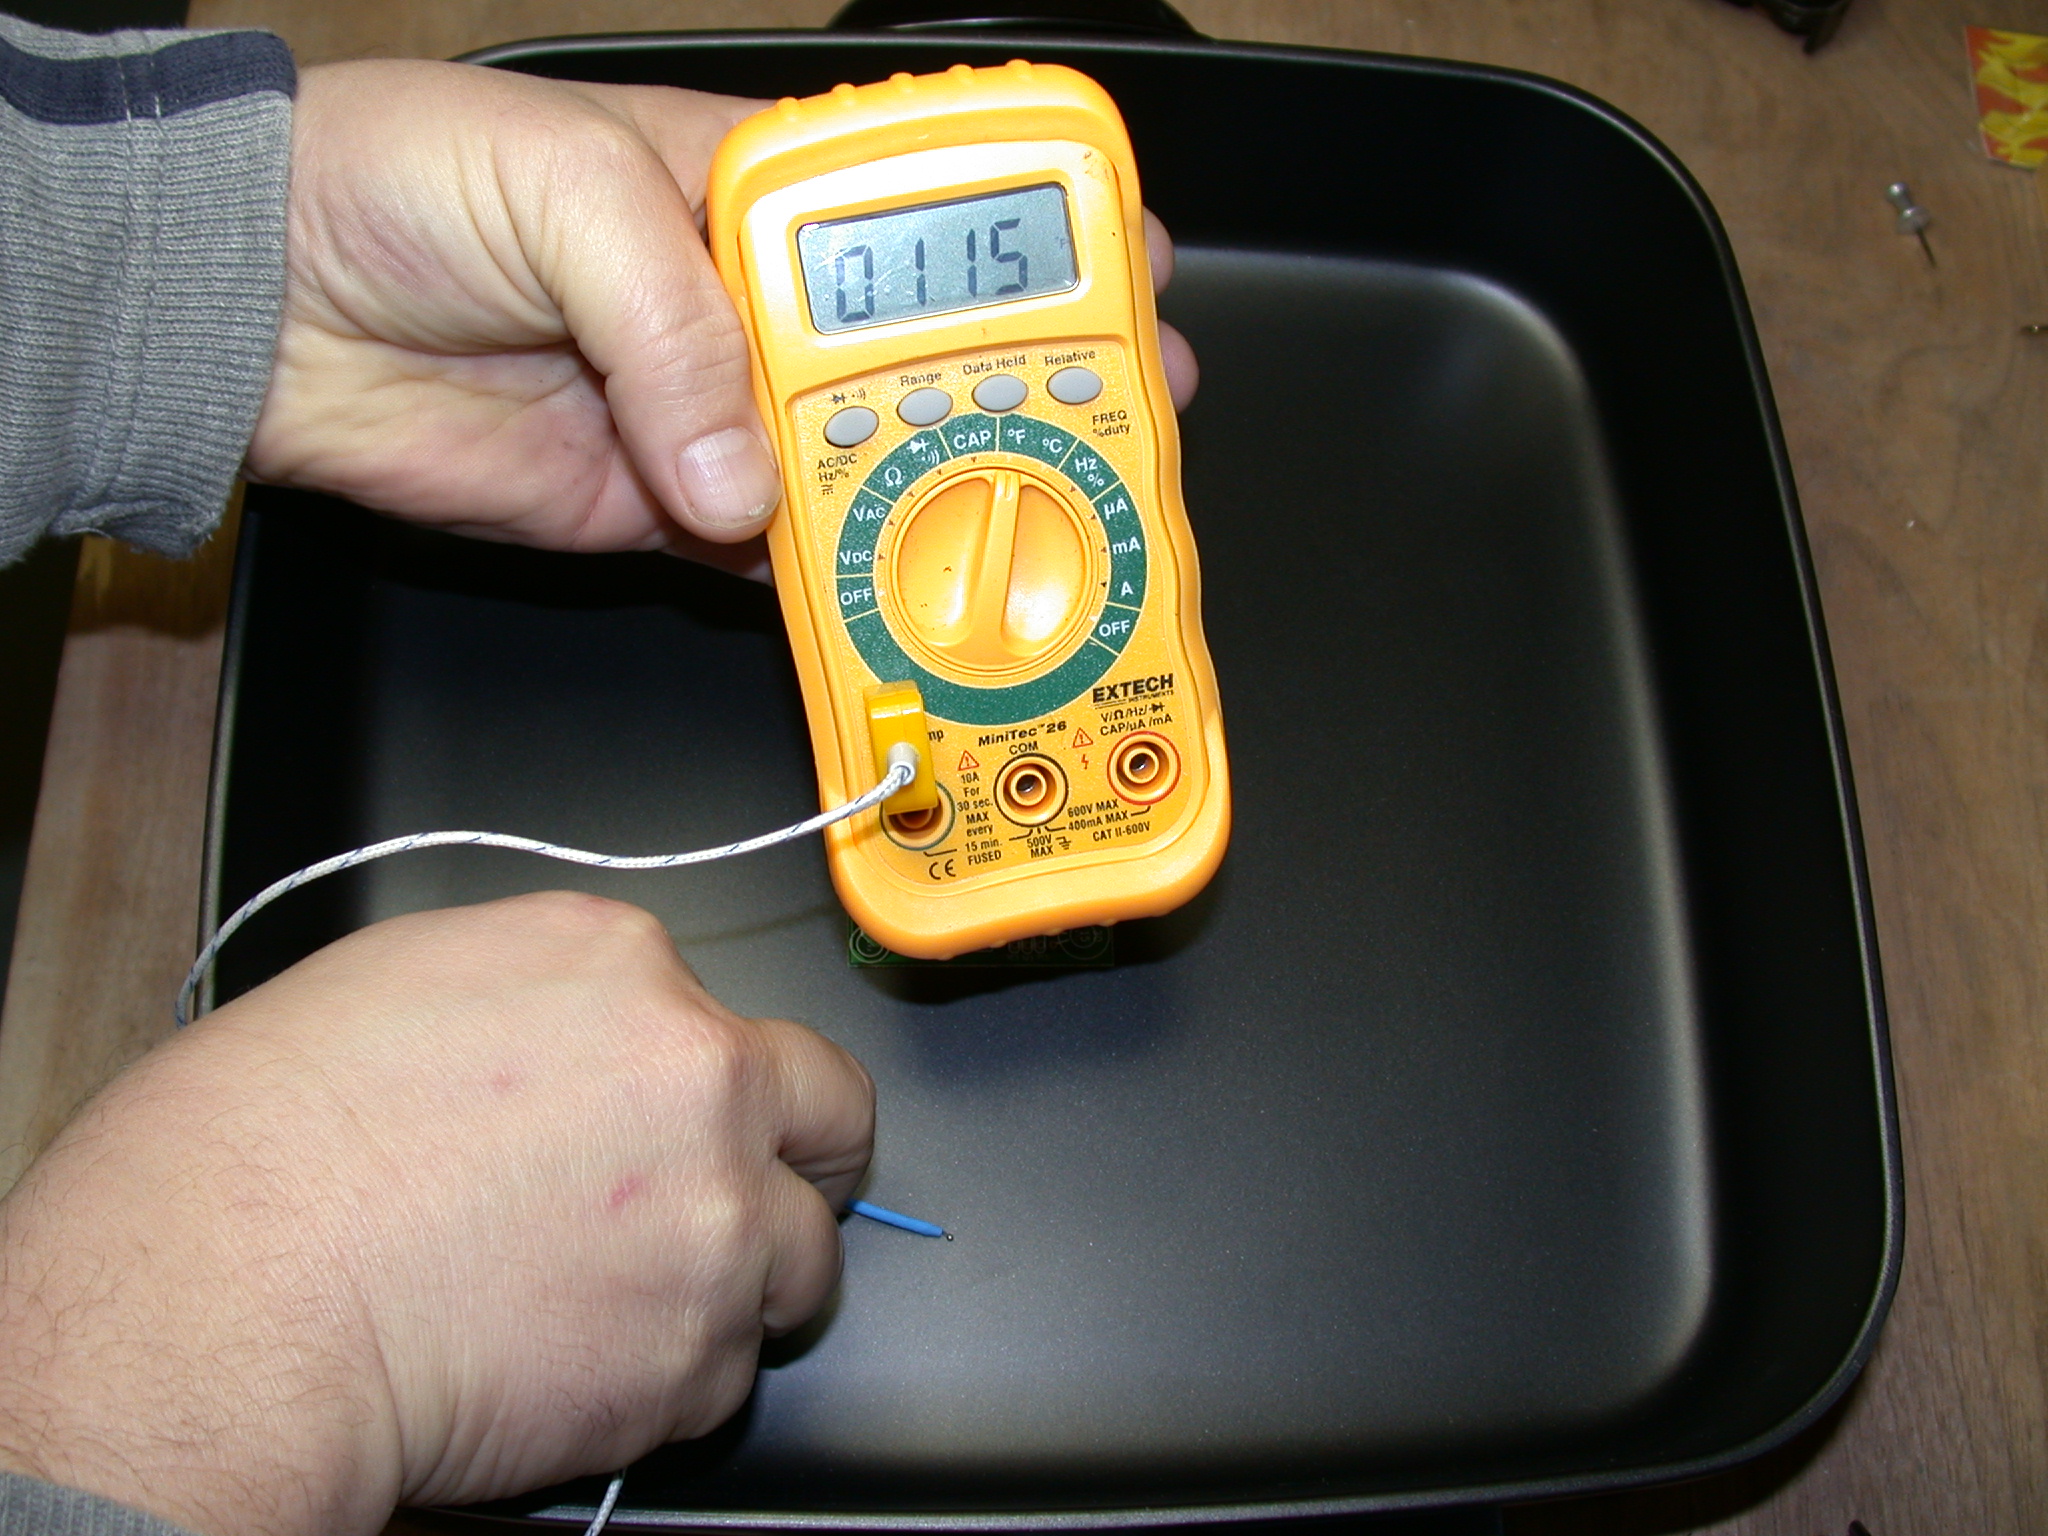 Checking the surface temperature of the electric skillet